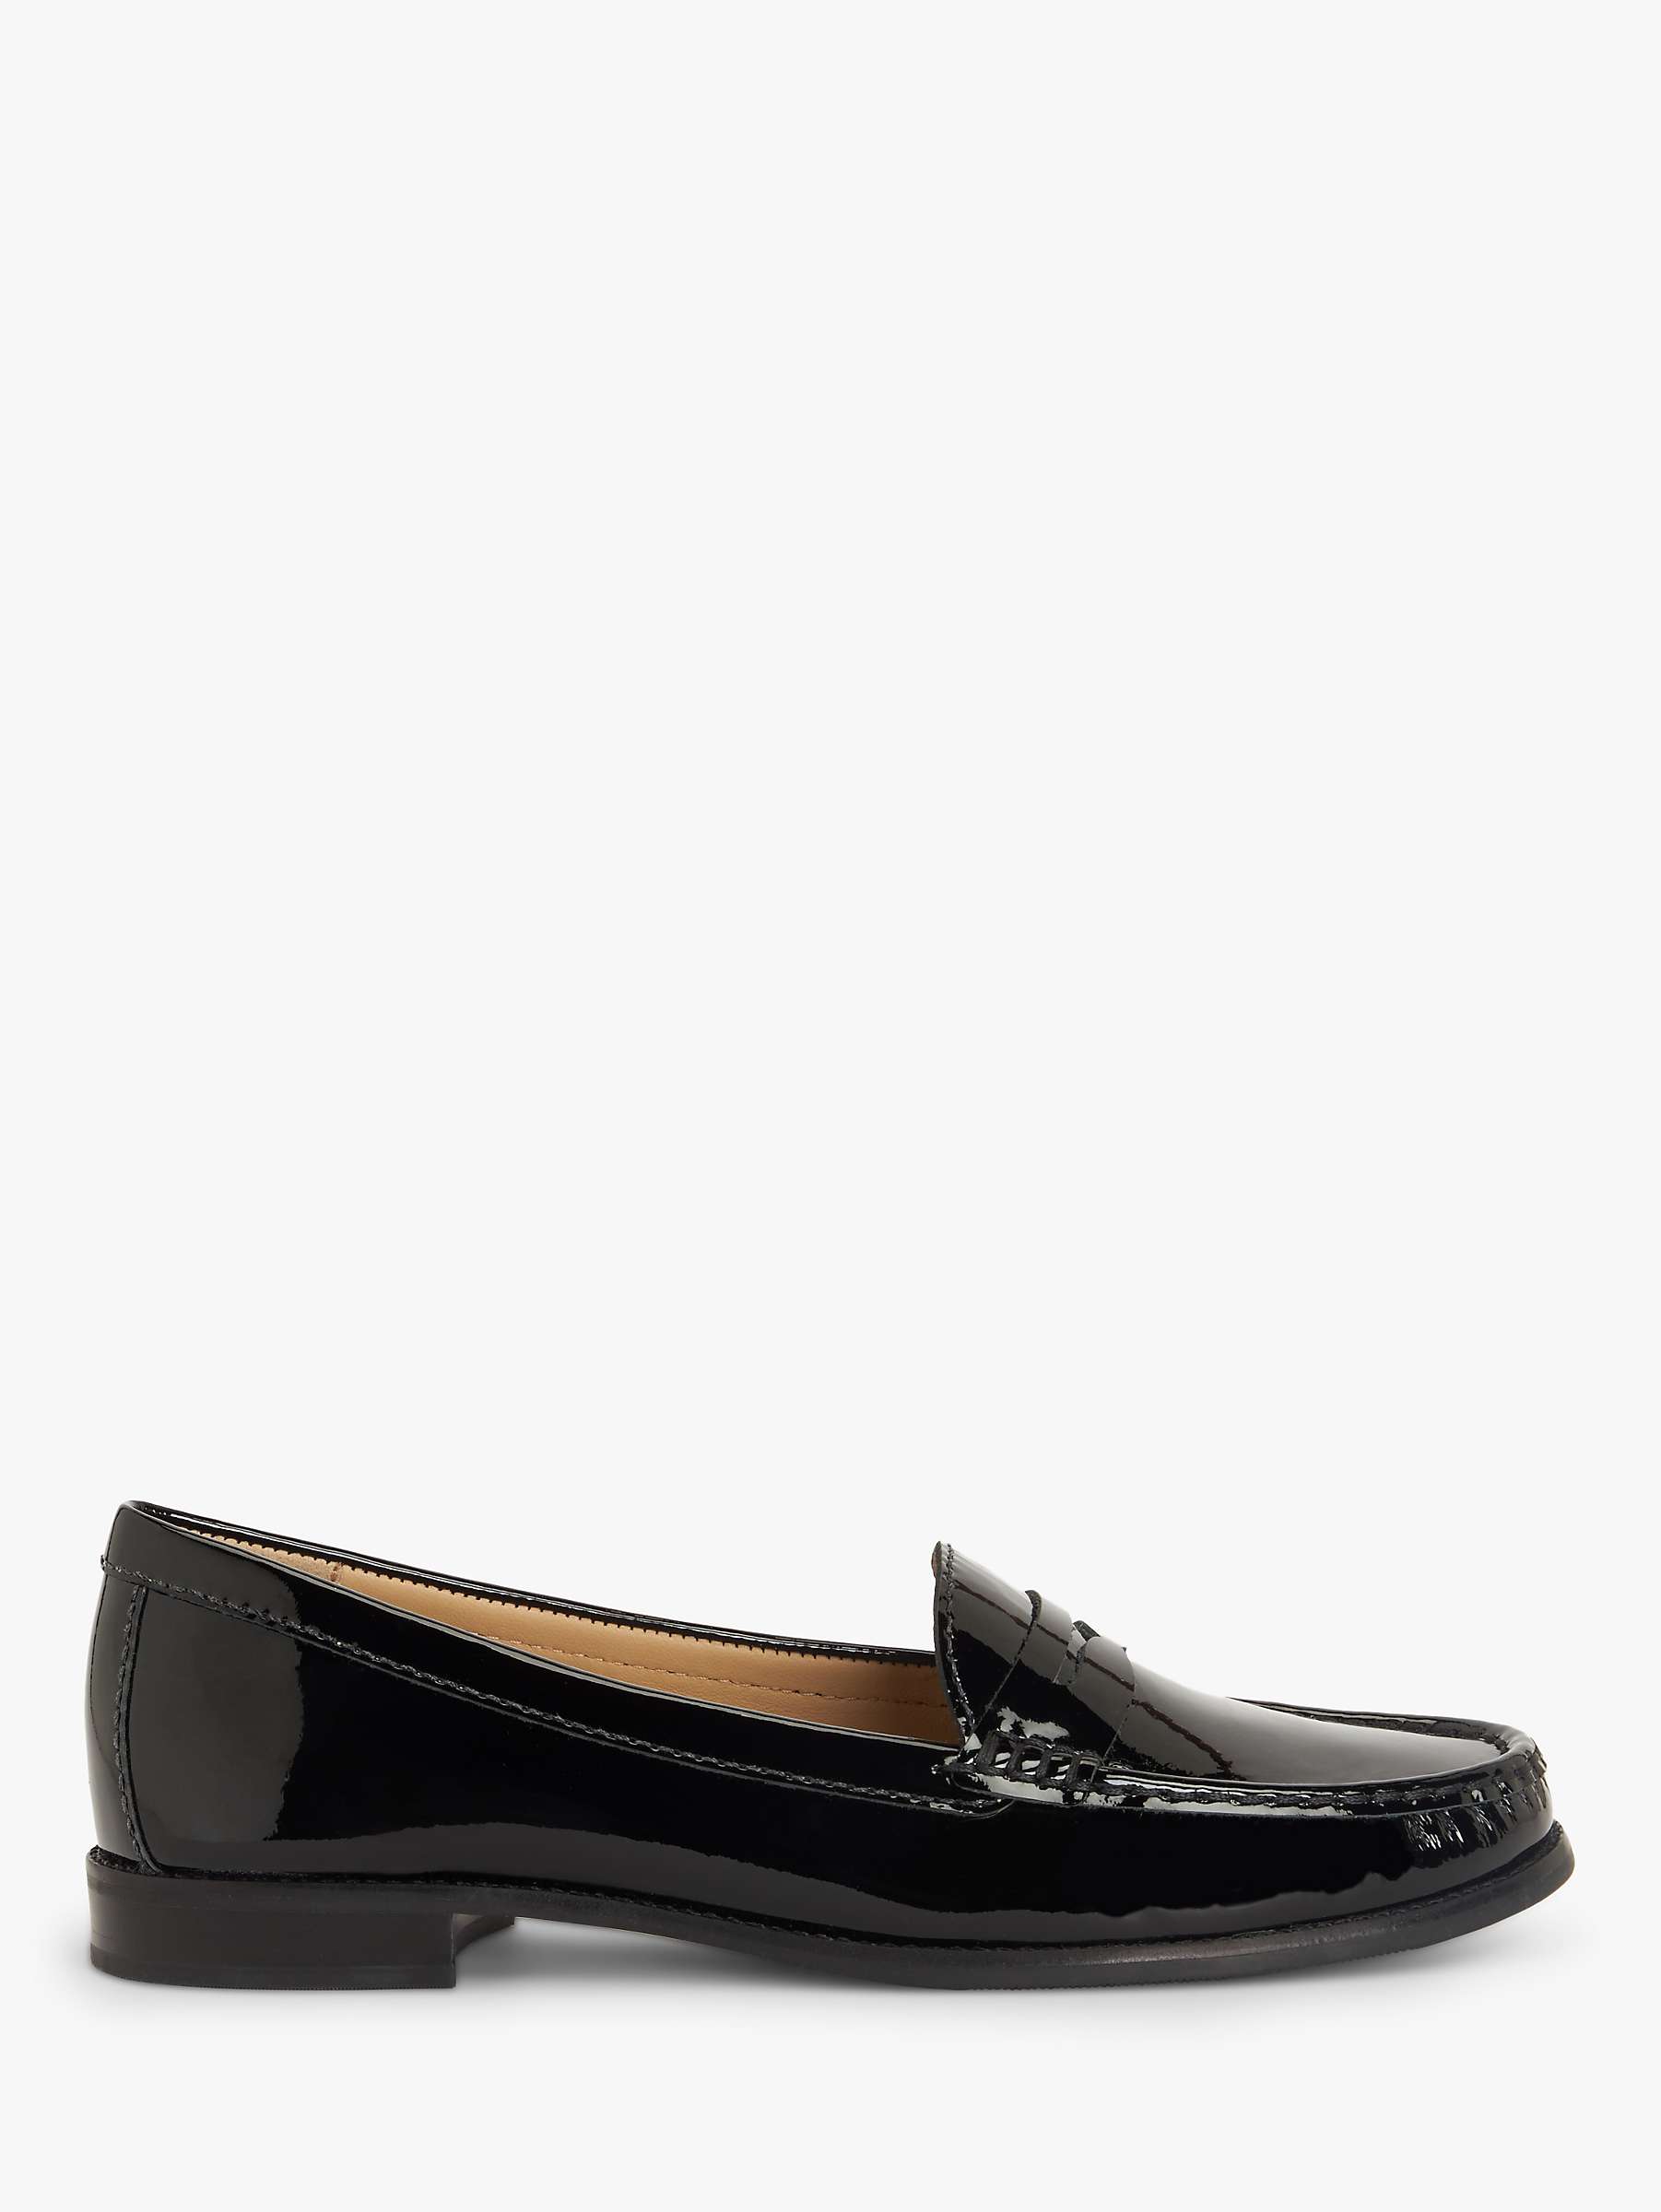 John Lewis Pennie Patent Leather Loafers, Black at John Lewis & Partners